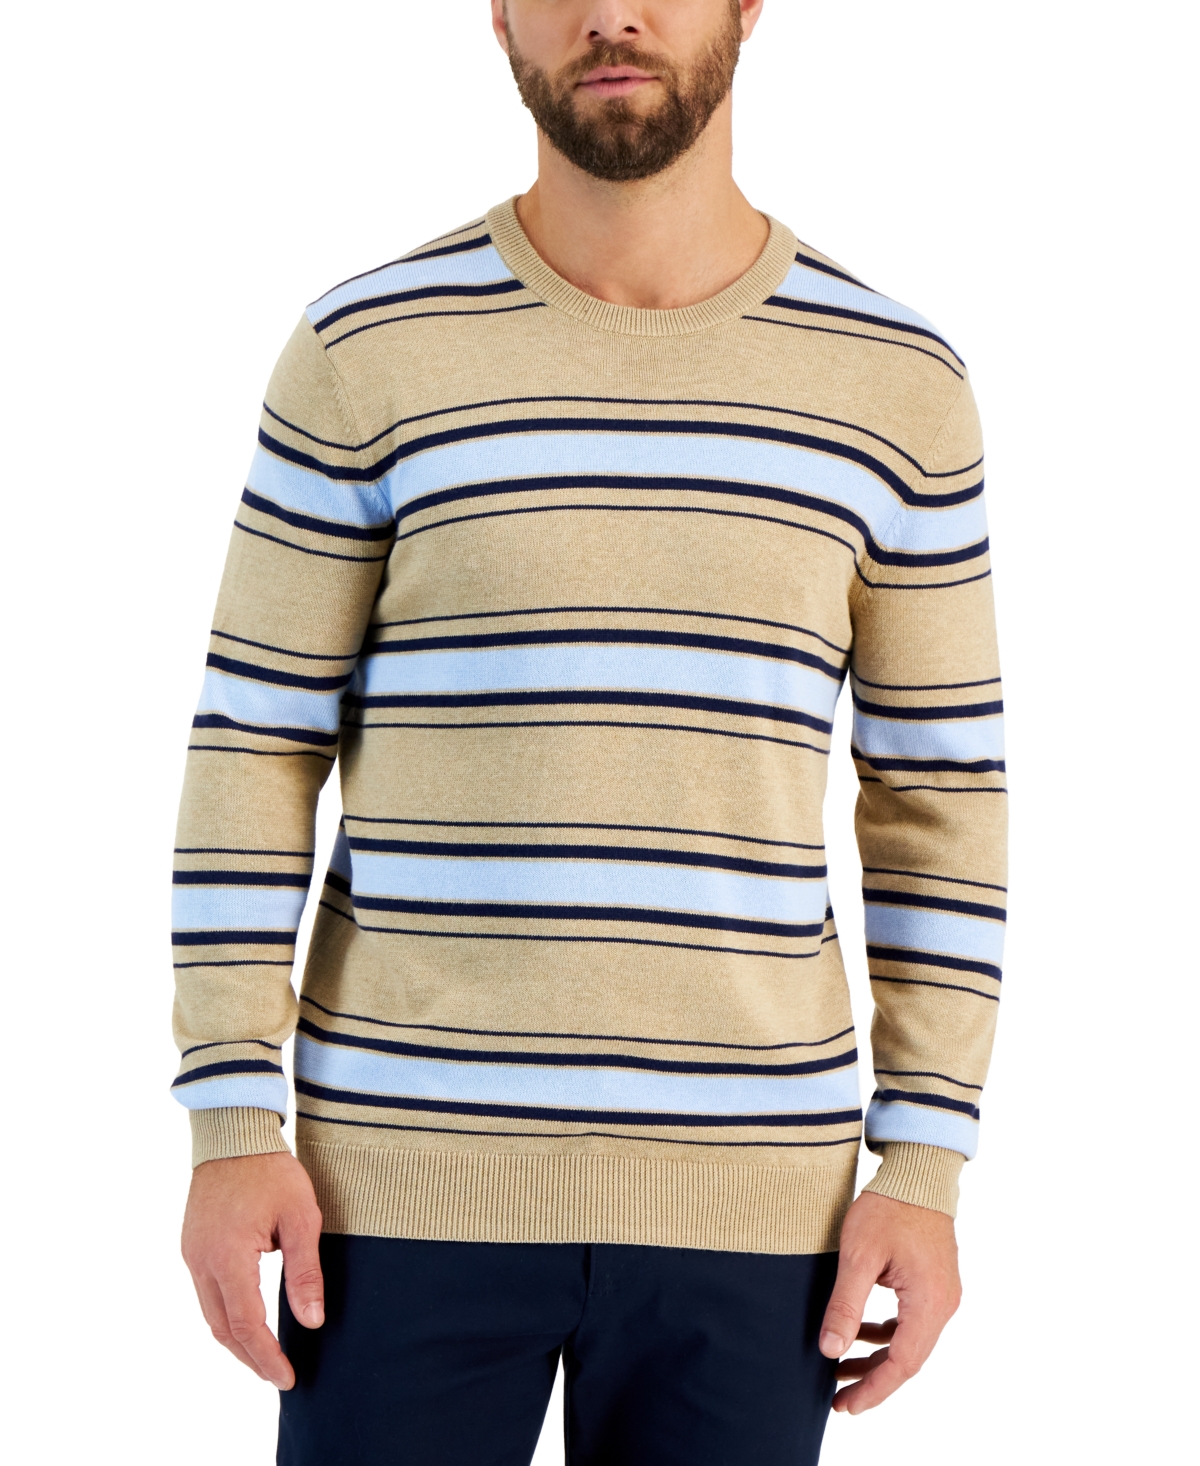 Men's Elevated Striped Long Sleeve Crewneck Sweater, Created for Macy's - Toast Heather